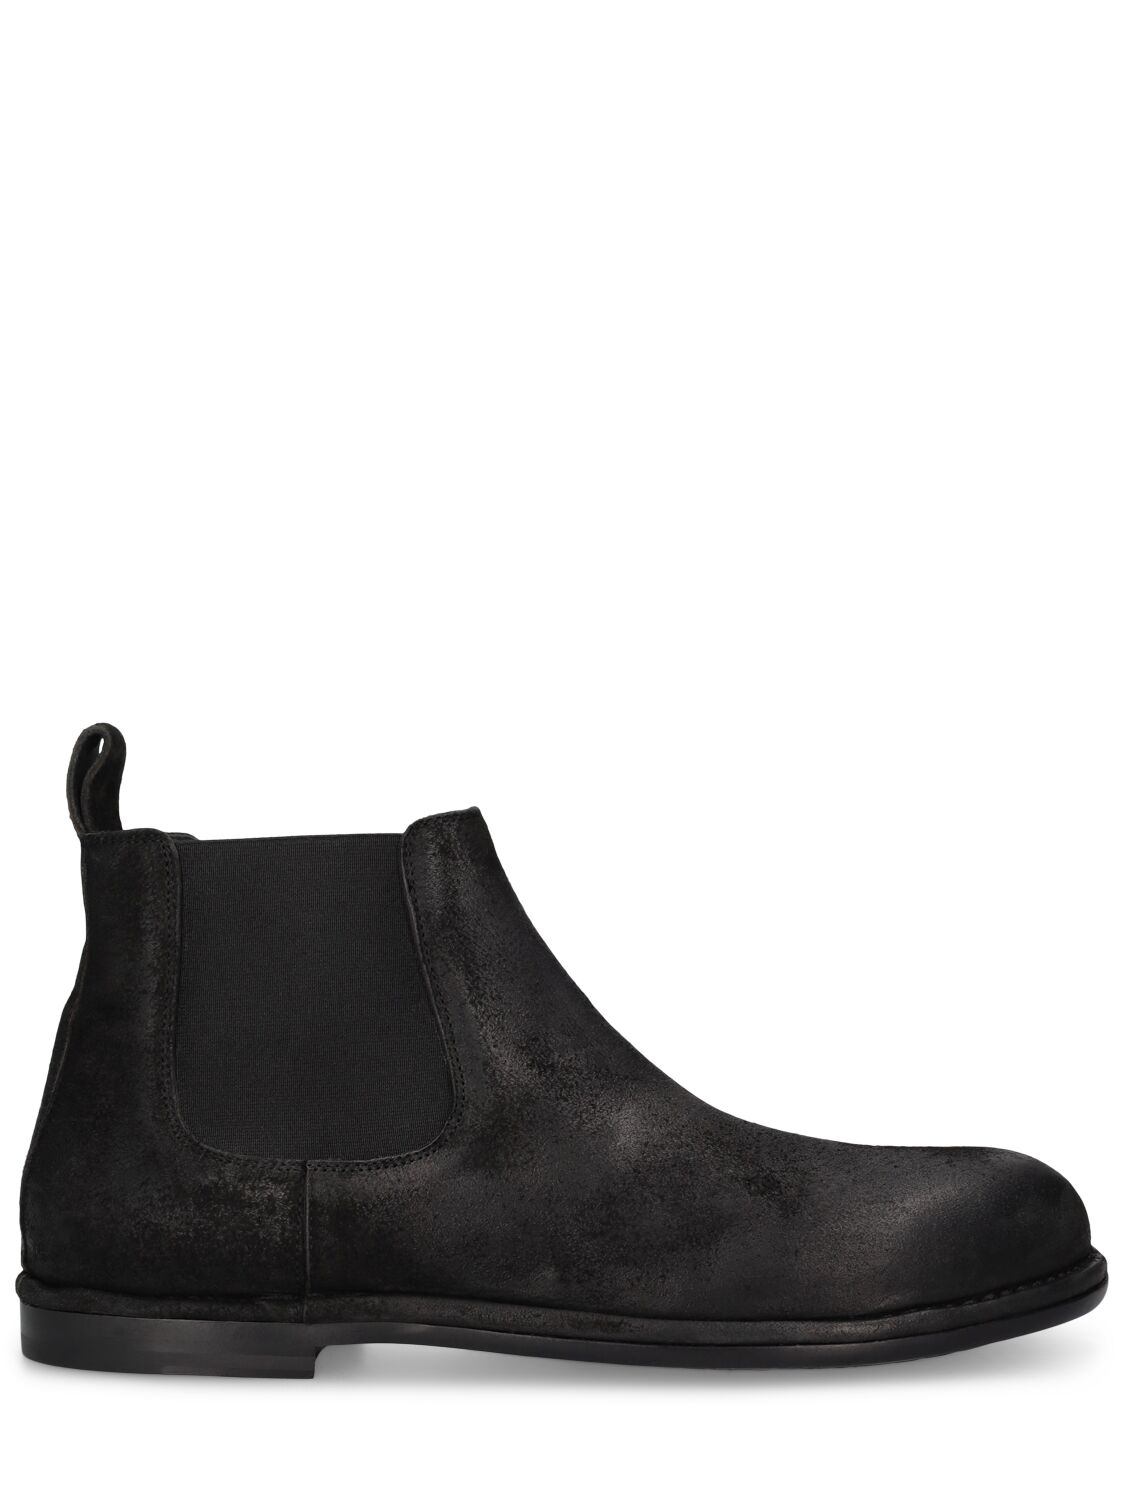 Image of Reverse Leather Chelsea Boots